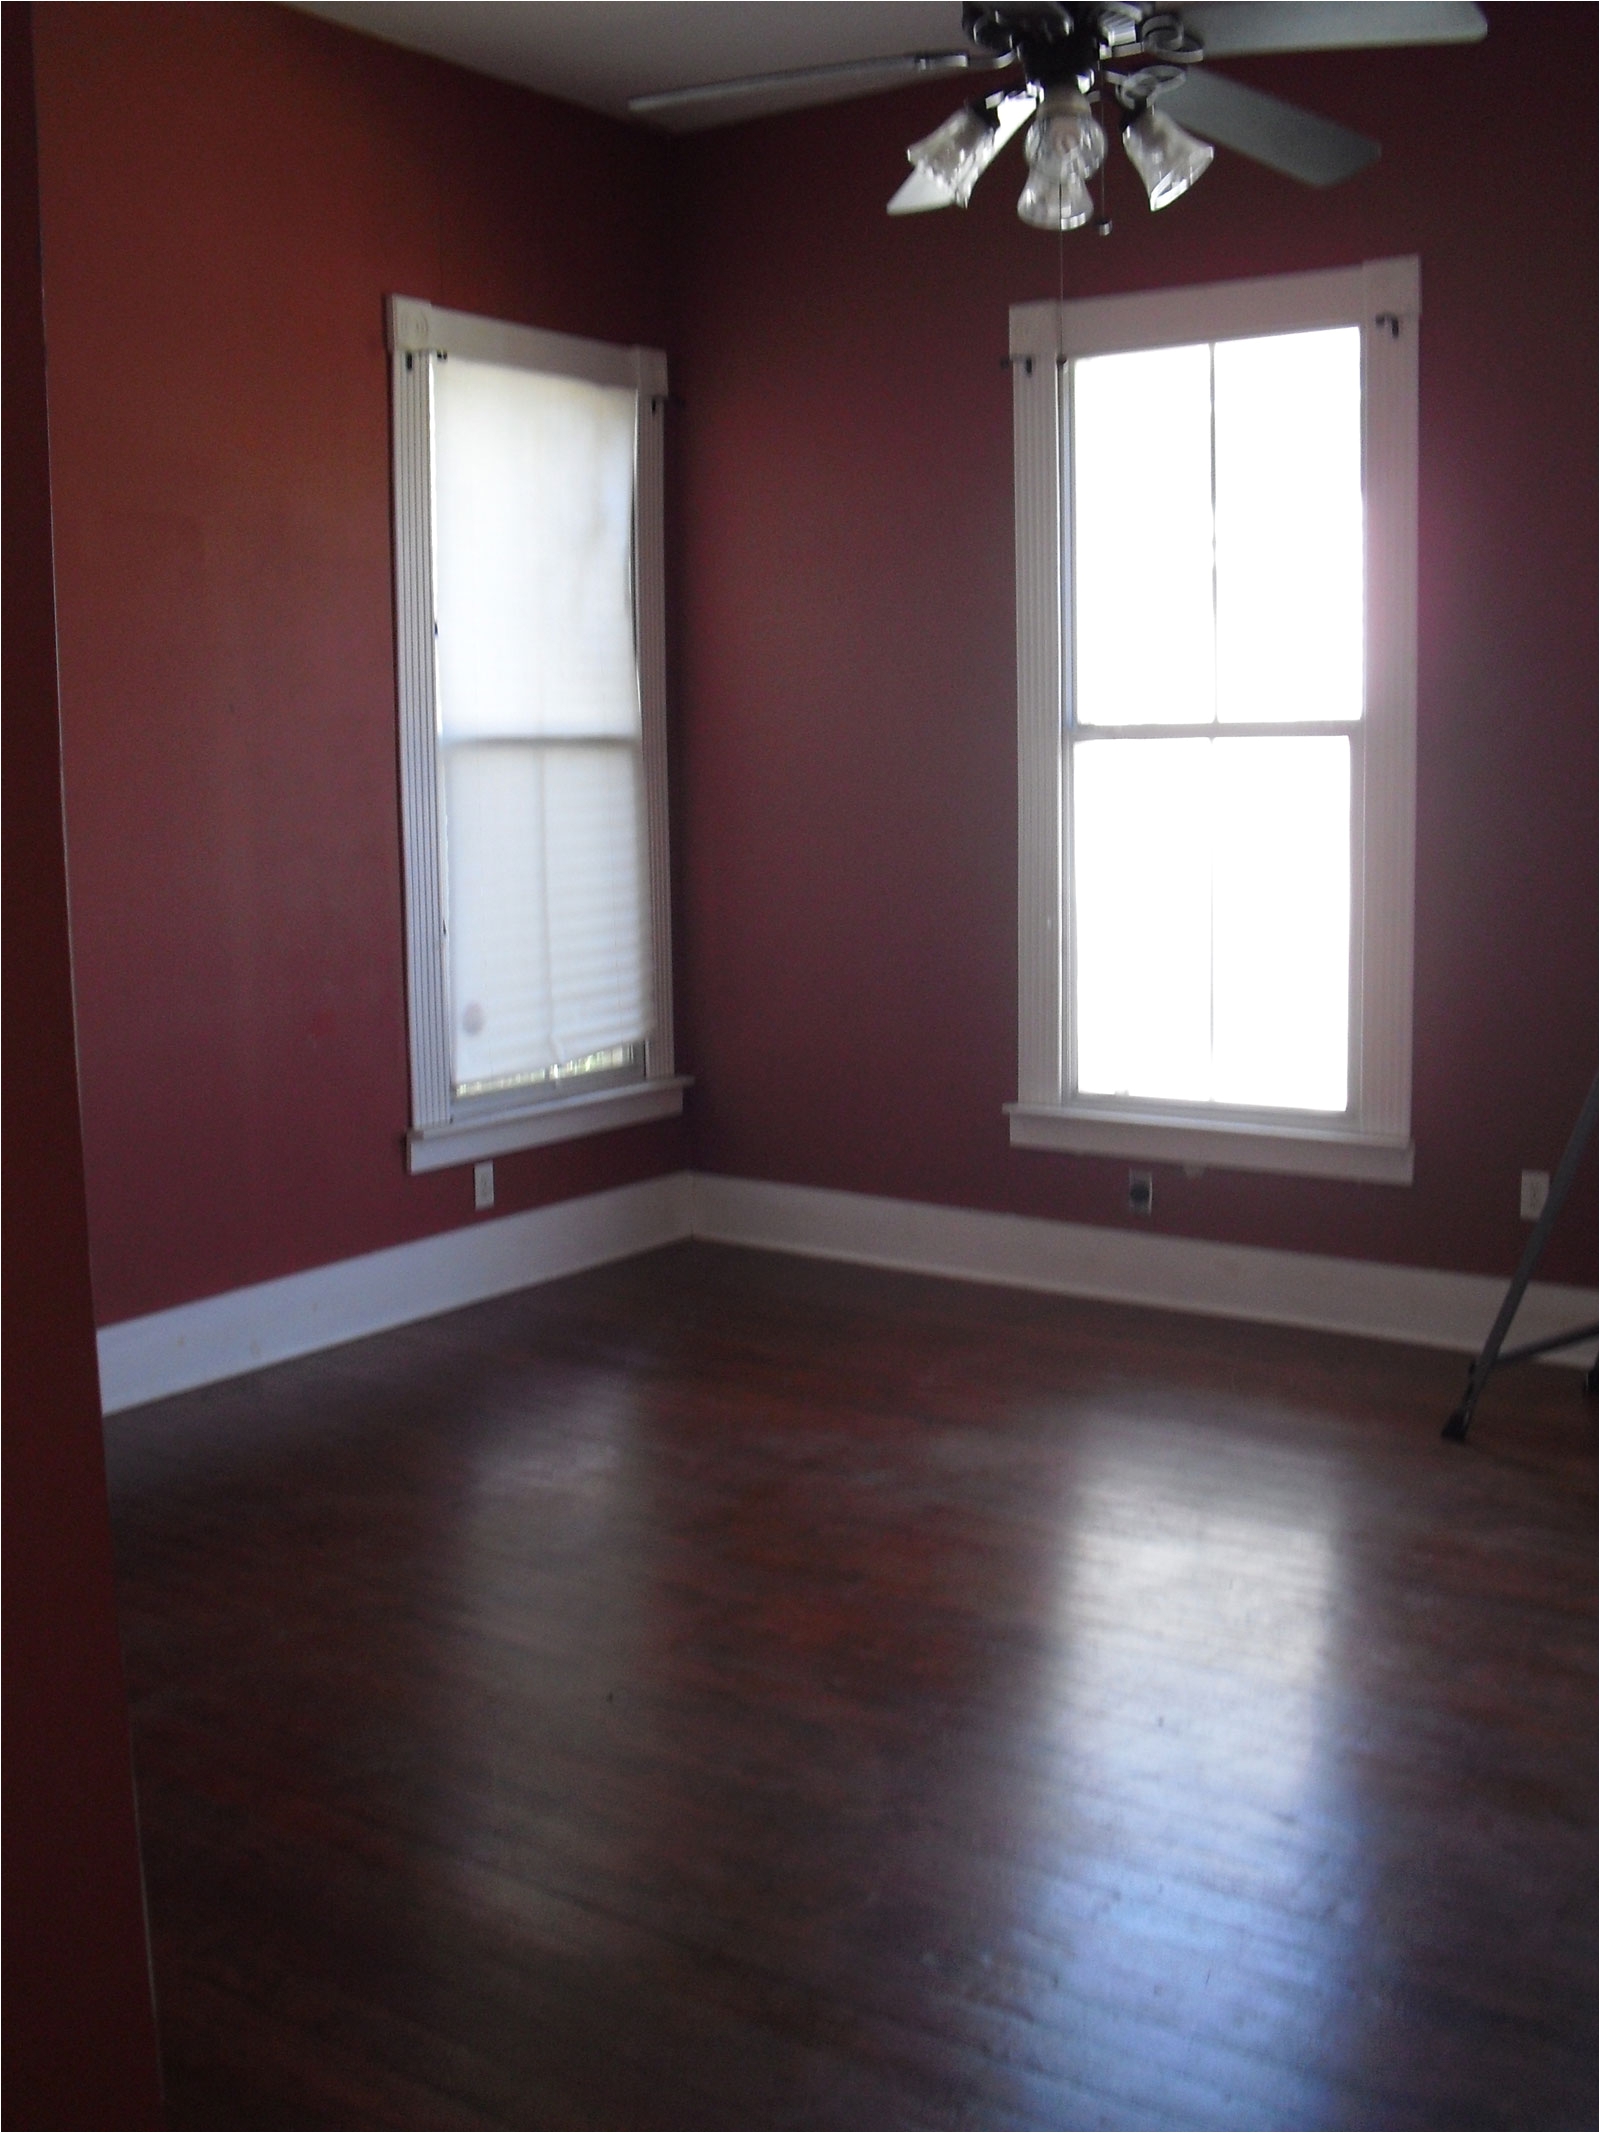 wall colors with hardwood floors delectable paint colors for living room withod floors flooroden